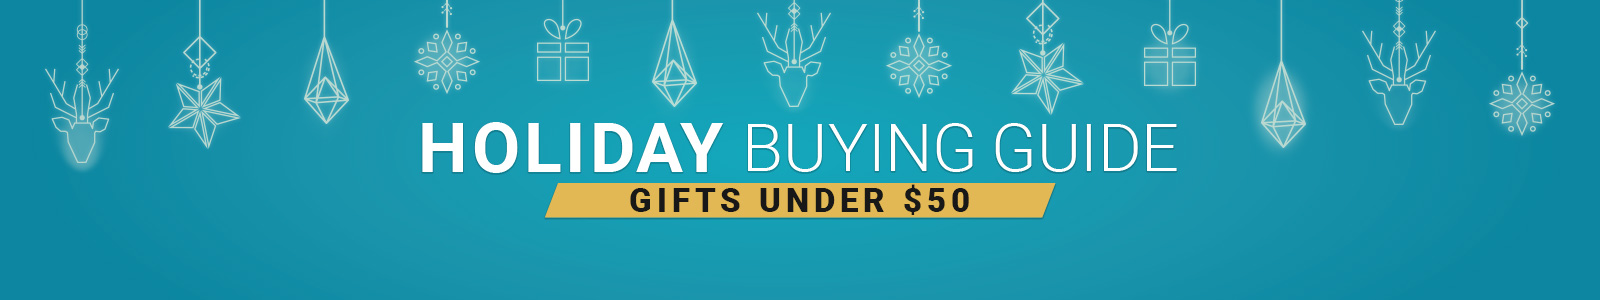 Holiday Buying Guide
Gifts under $50
Shop Now